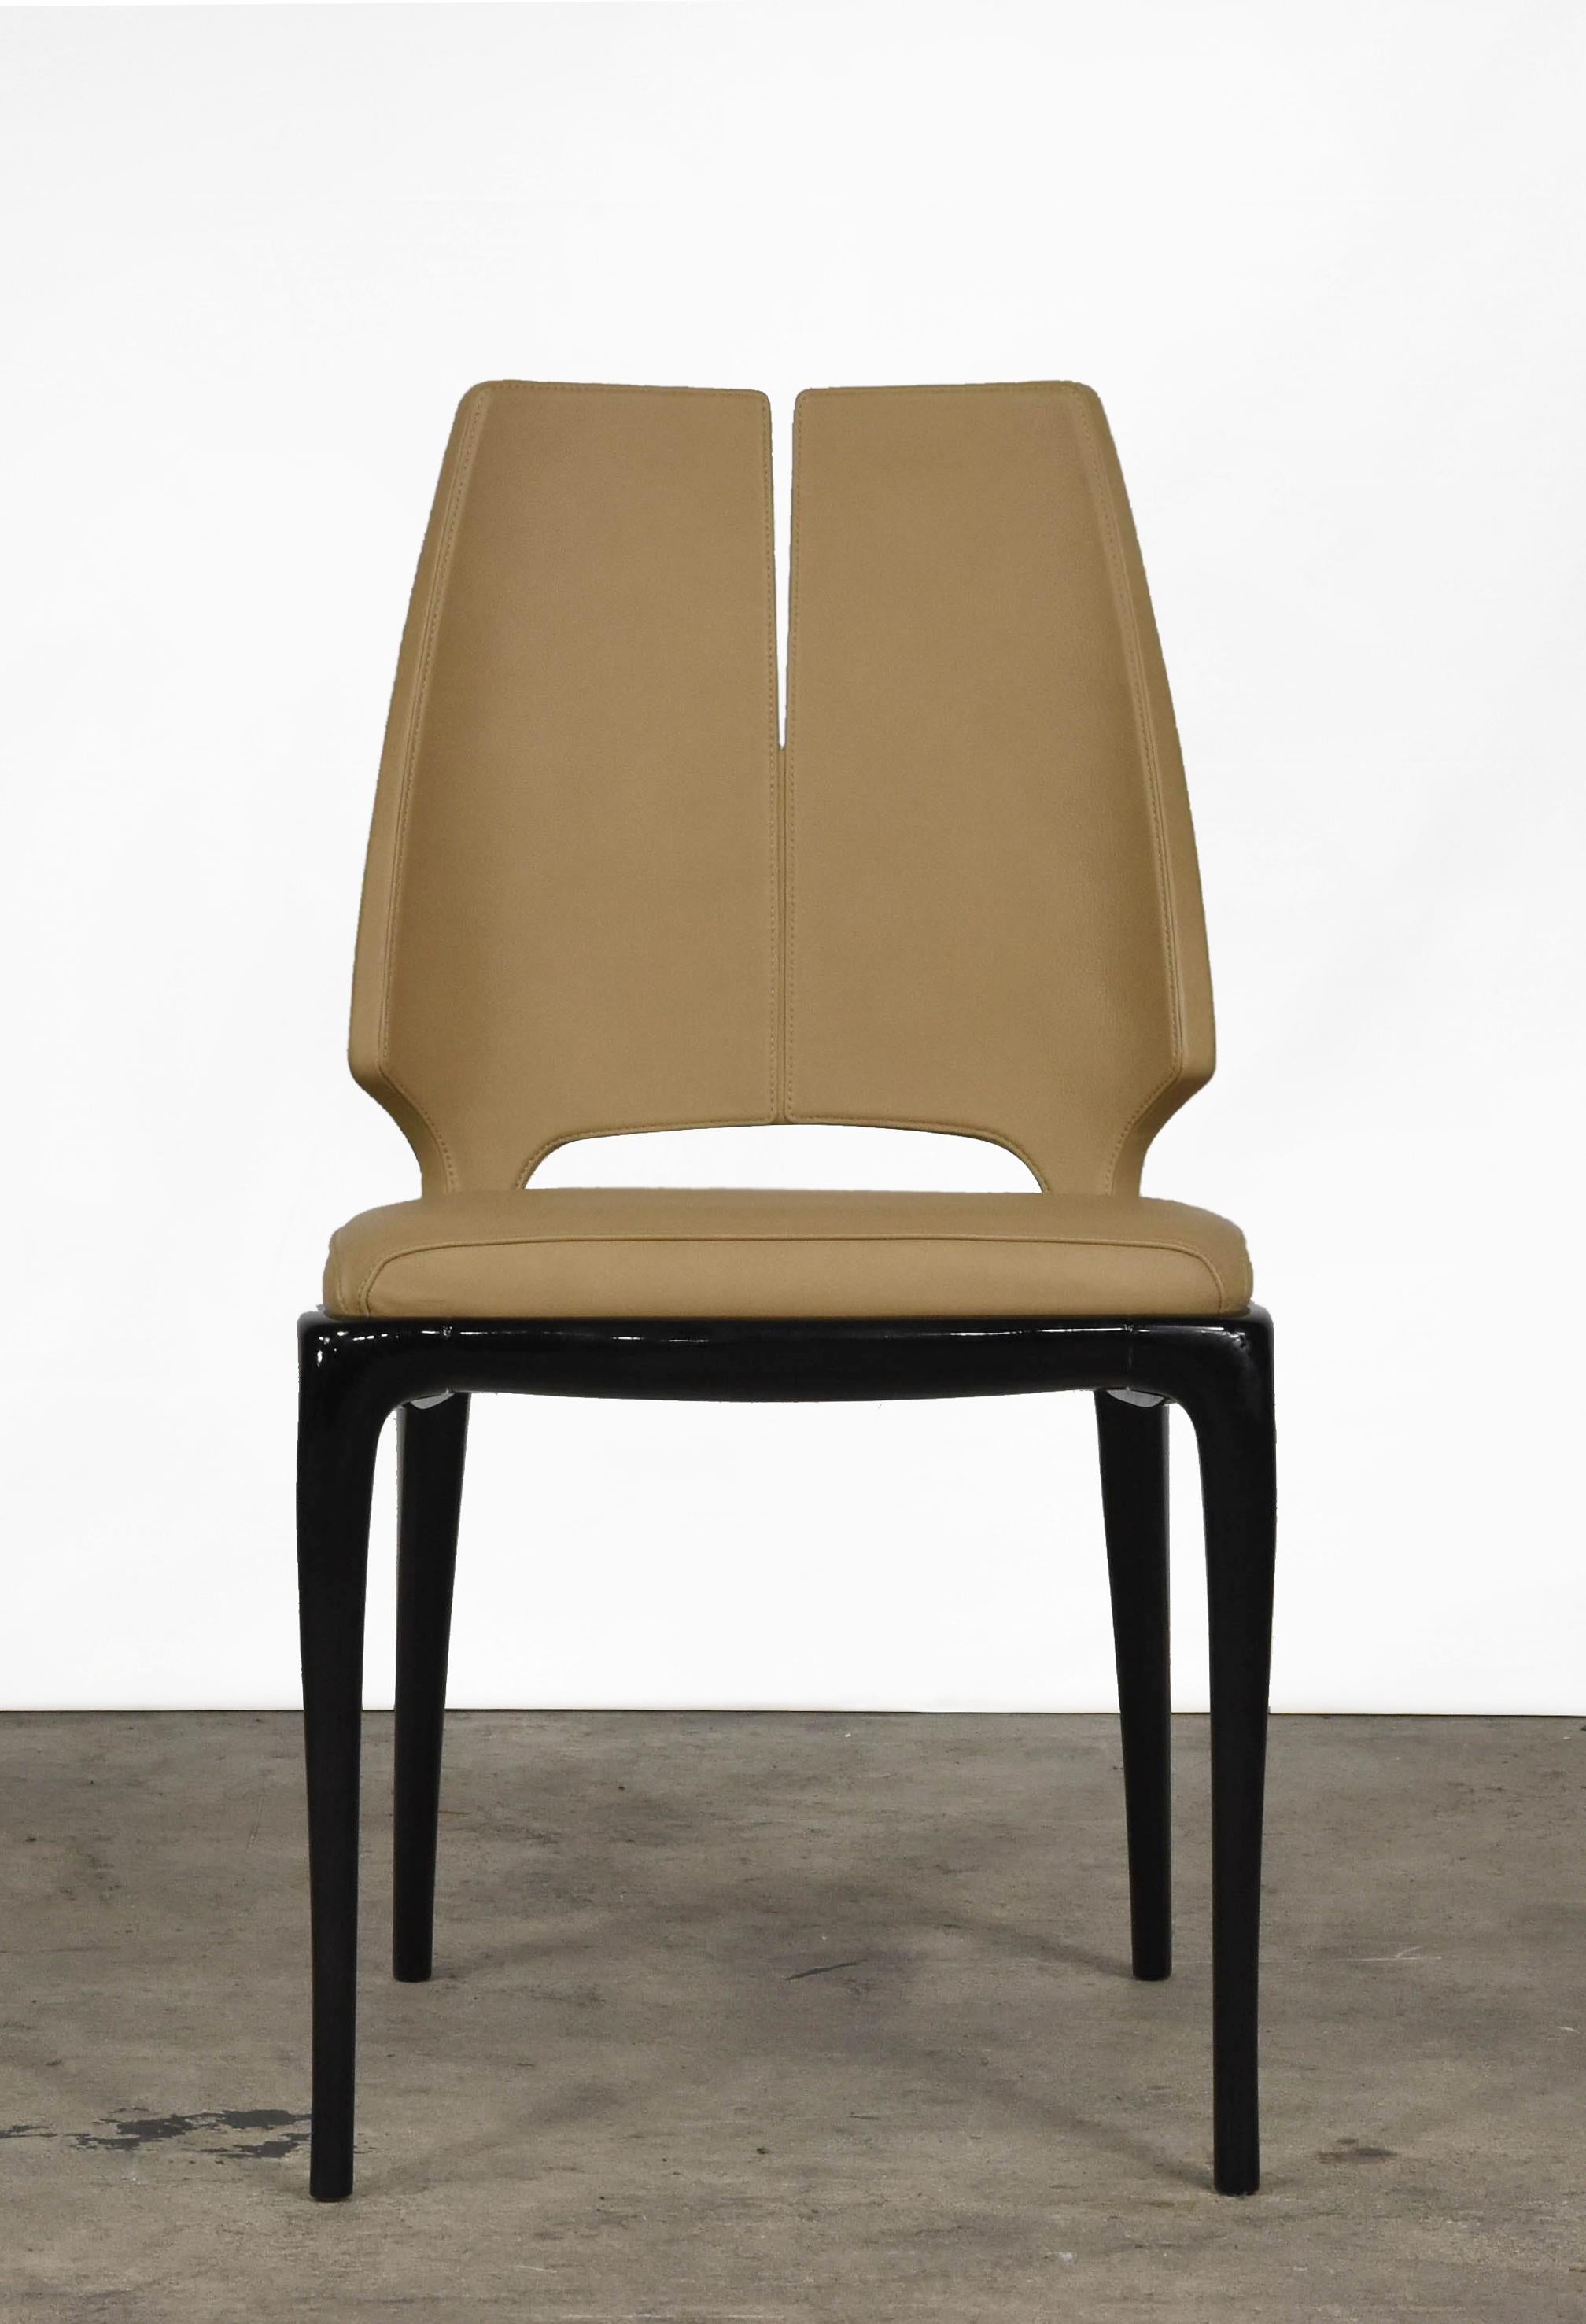 Slender and refined, the Contour chair with armrests brilliantly brings together a sober spirit with
contemporary taste. Made with dark-lacquered wood, it houses the camel colored leather seat
cushion, which matches the seatback upholstery.